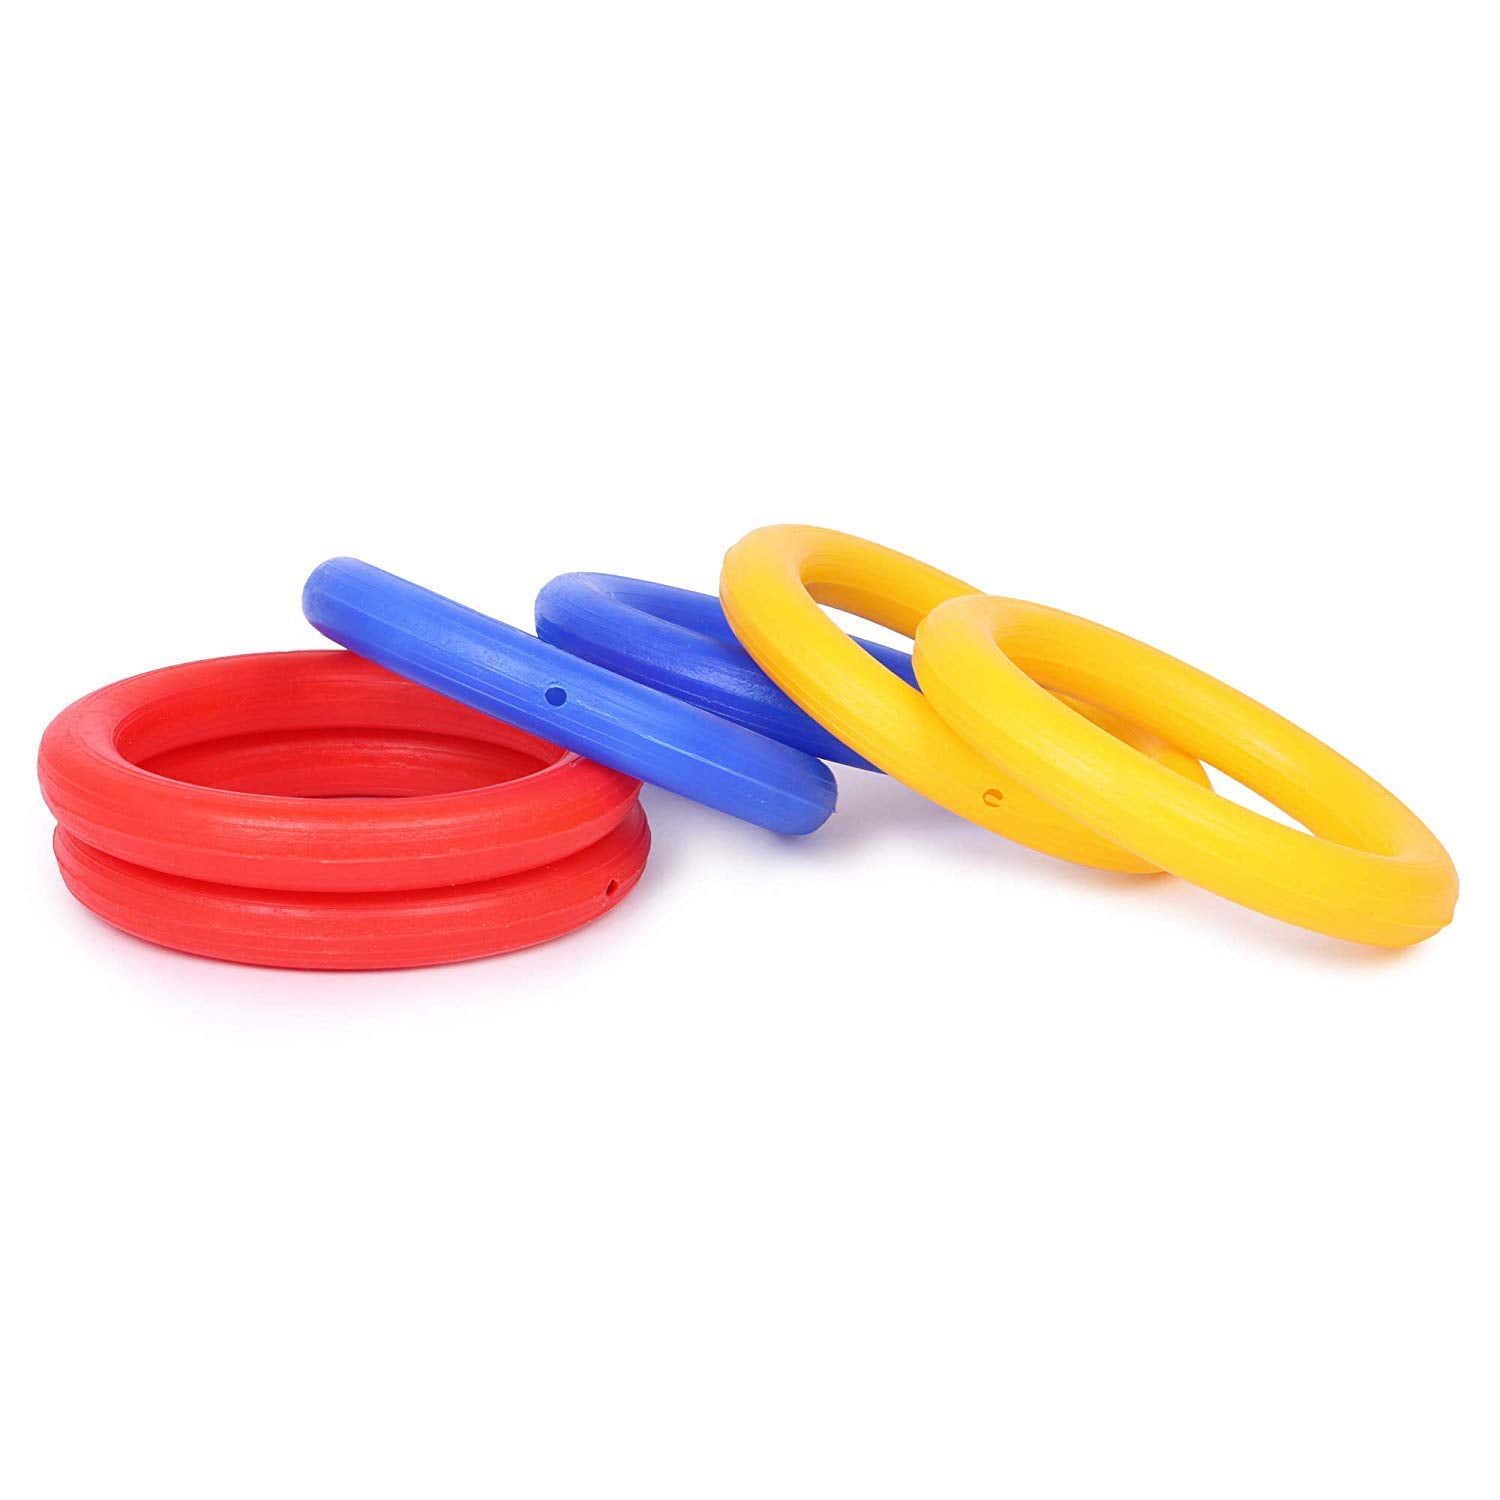 8078 13 Pc Ring Toss Game widely used by childrenâ€™s and kids for playing and enjoying purposes and all in all kinds of household and official places etc. DeoDap